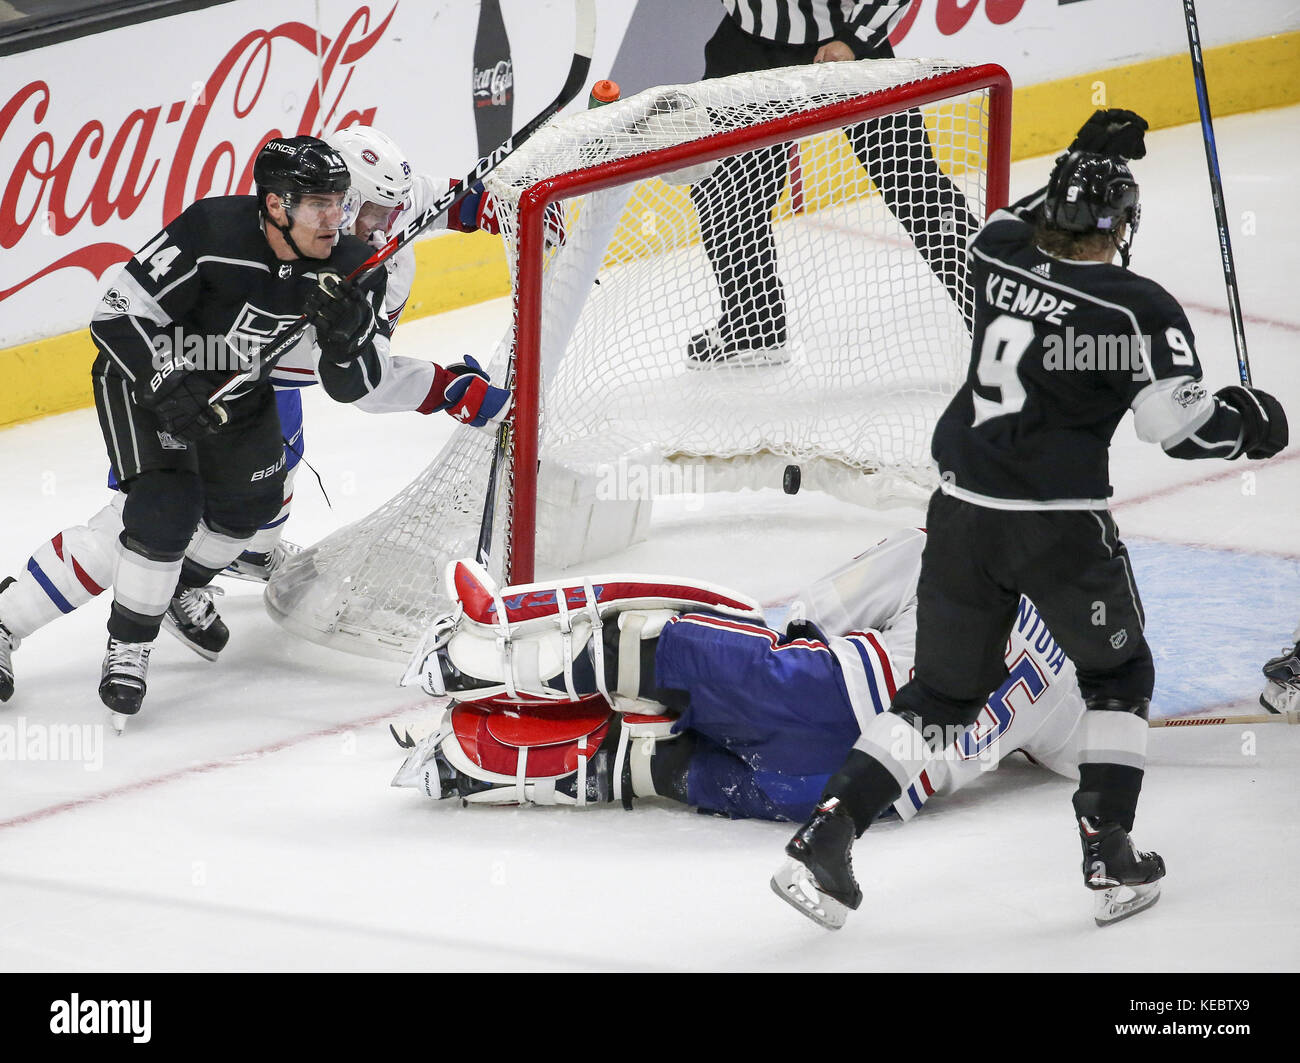 Los Angeles, California, USA. 18th Oct, 2017. Los Angeles Kings forward Michael Cammalleri (14) and forward Adrian Kempe (9) in actions during a 2017-2018 NHL hockey game between Los Angeles Kings and Montréal Canadiens in Los Angeles on Oct. 18, 2017. Los Angeles Kings won 5-1 Credit: Ringo Chiu/ZUMA Wire/Alamy Live News Stock Photo